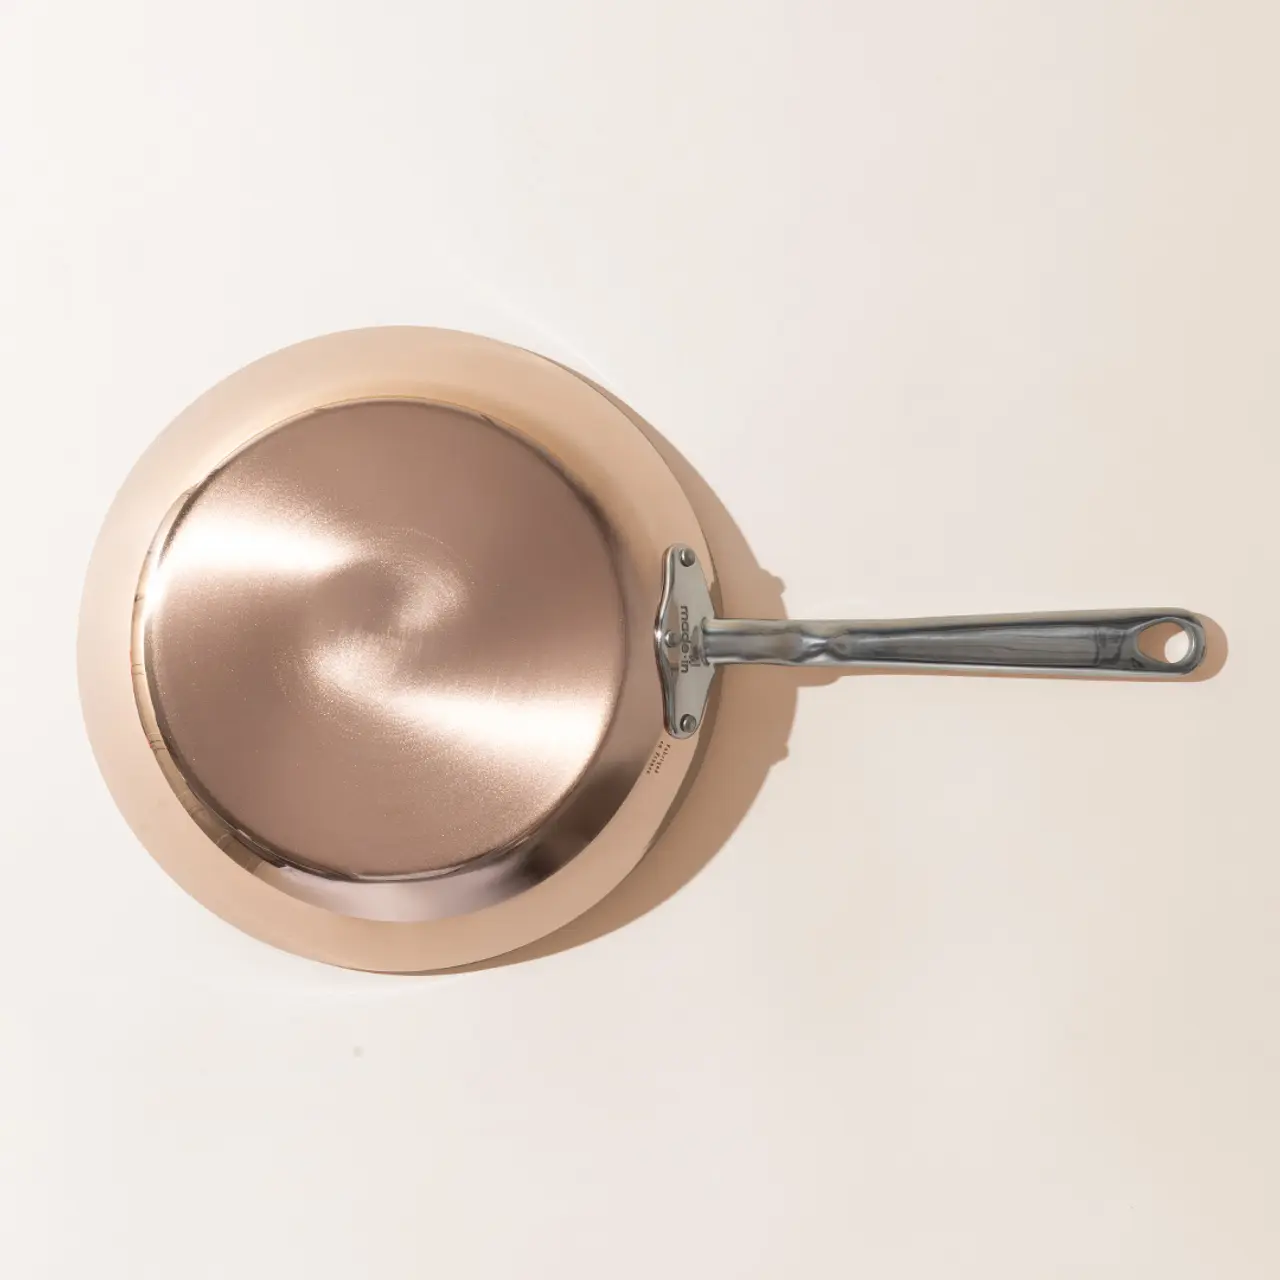 A top-down view of a new copper-colored frying pan with a stainless steel handle on a light background.